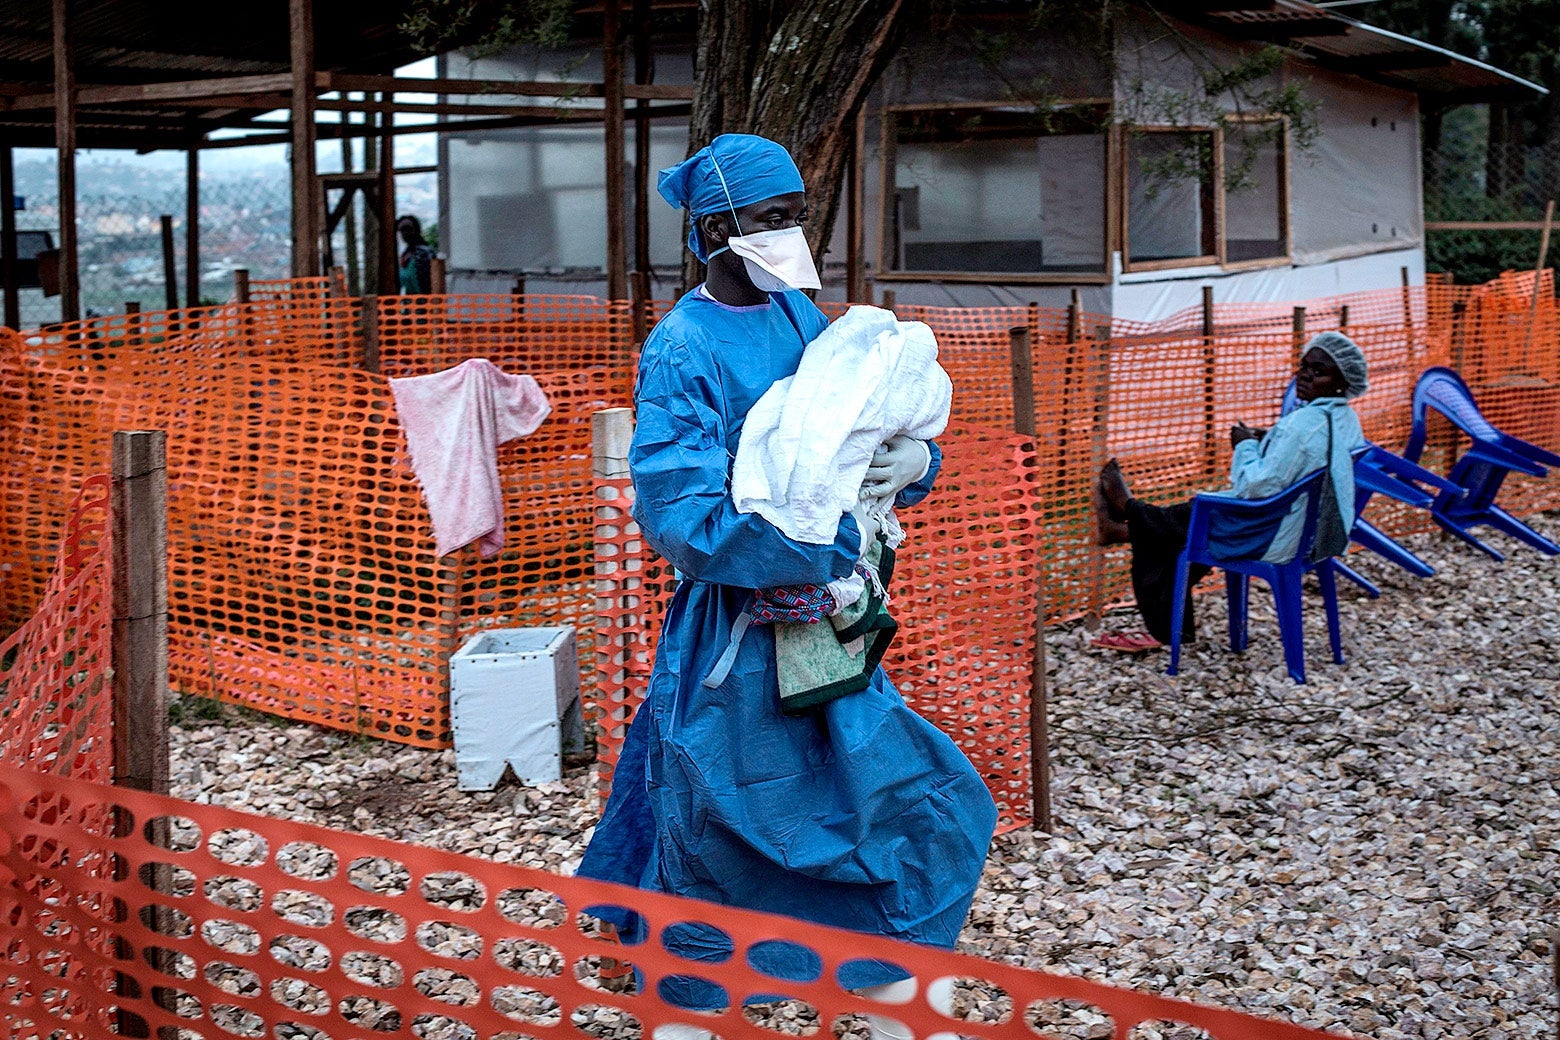 A health worker carries a baby behind orange fencing.